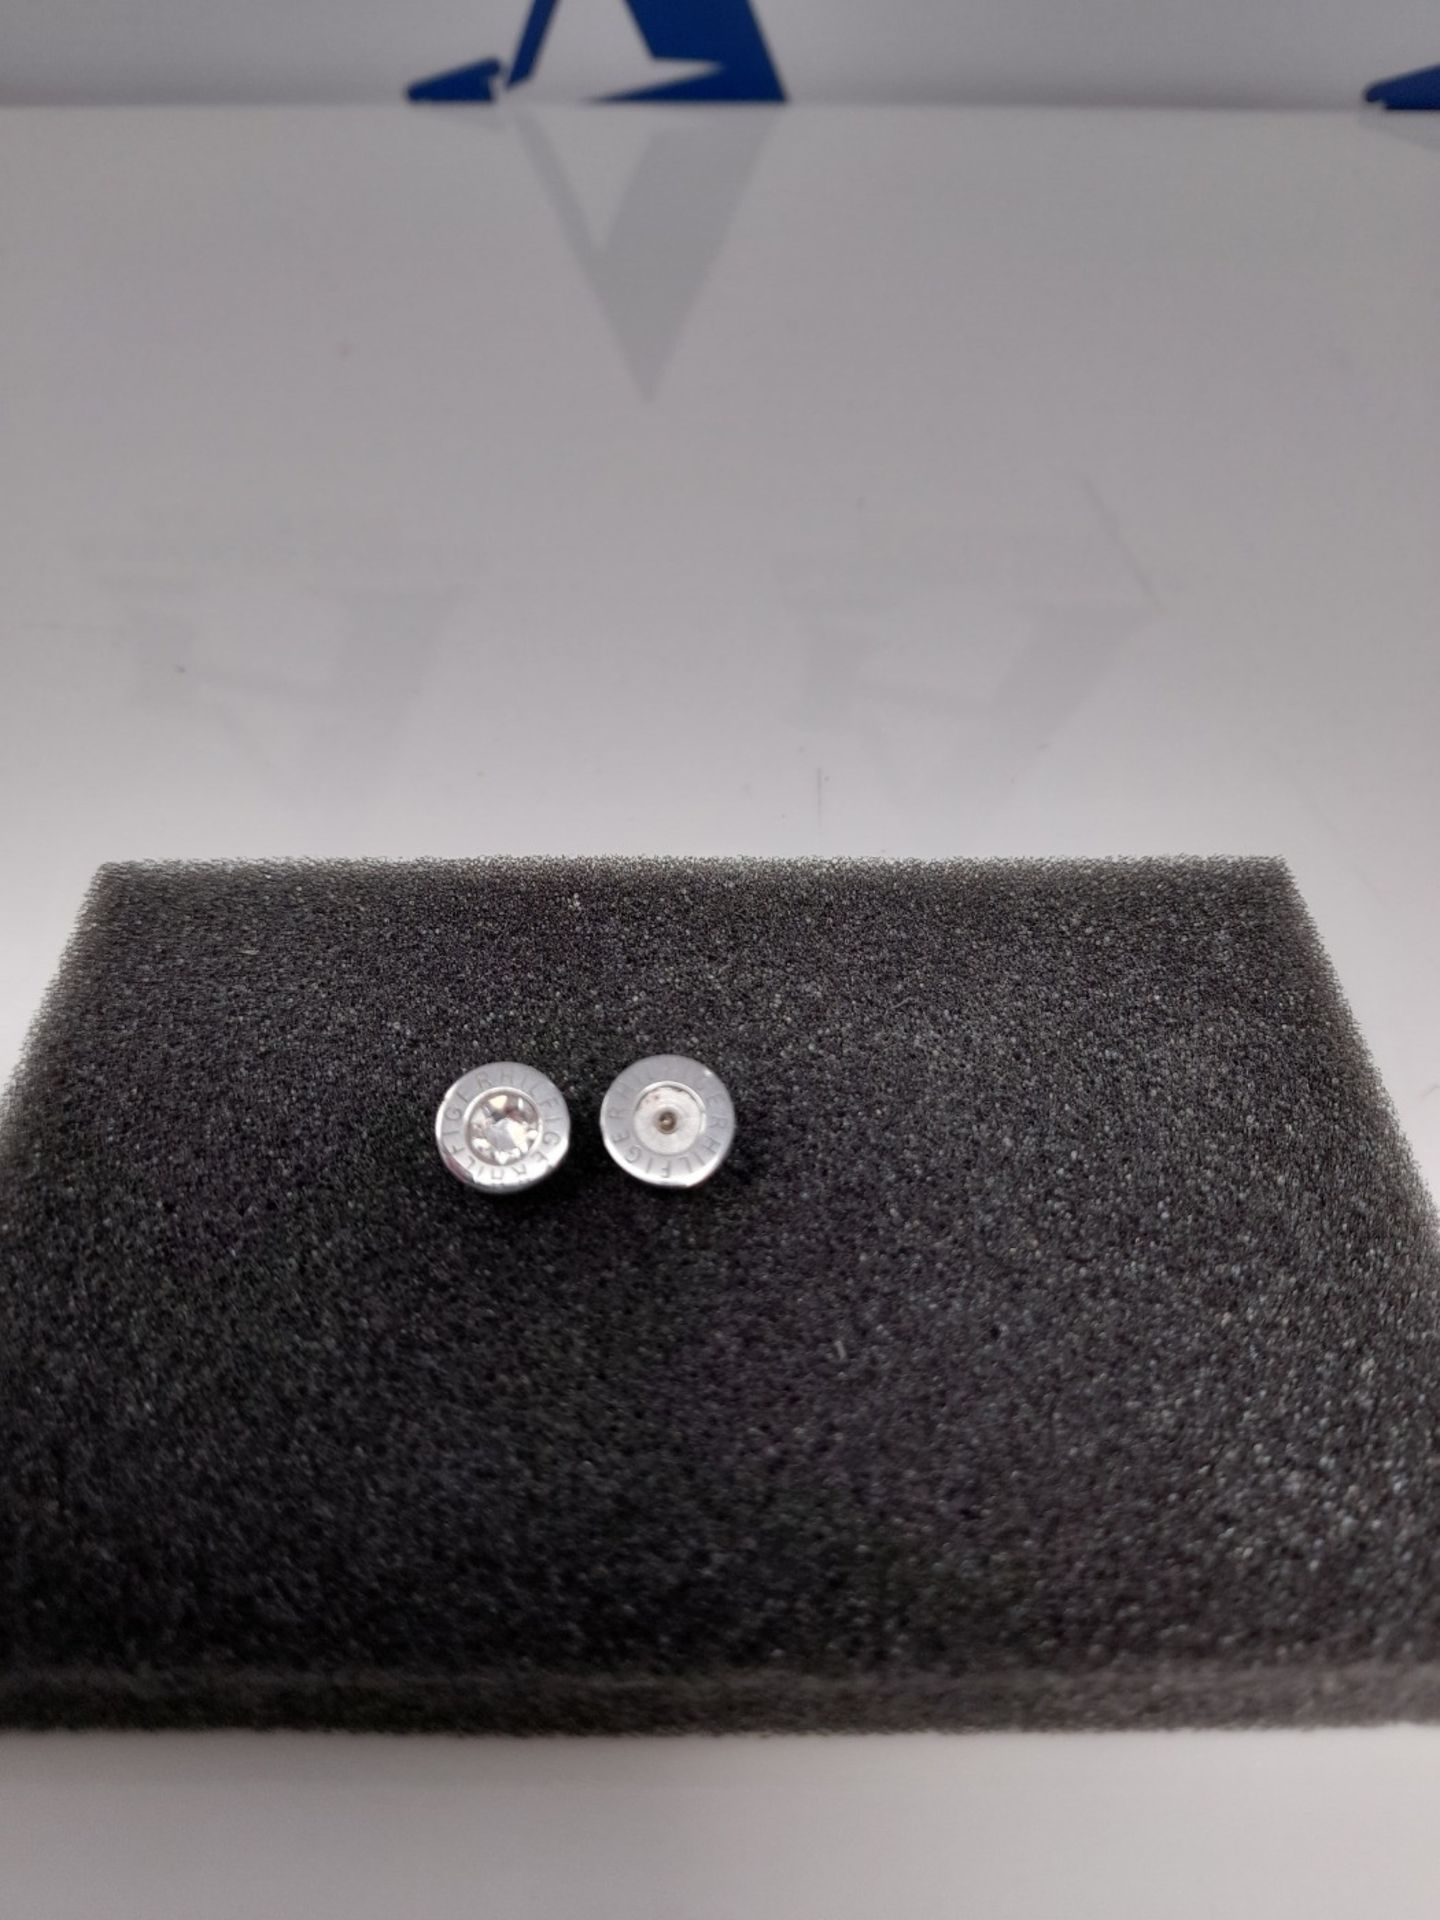 [INCOMPLETE] Tommy Hilfiger jewelry 2700259 Cubic Zirconia Steel Stud Earrings - Image 2 of 3